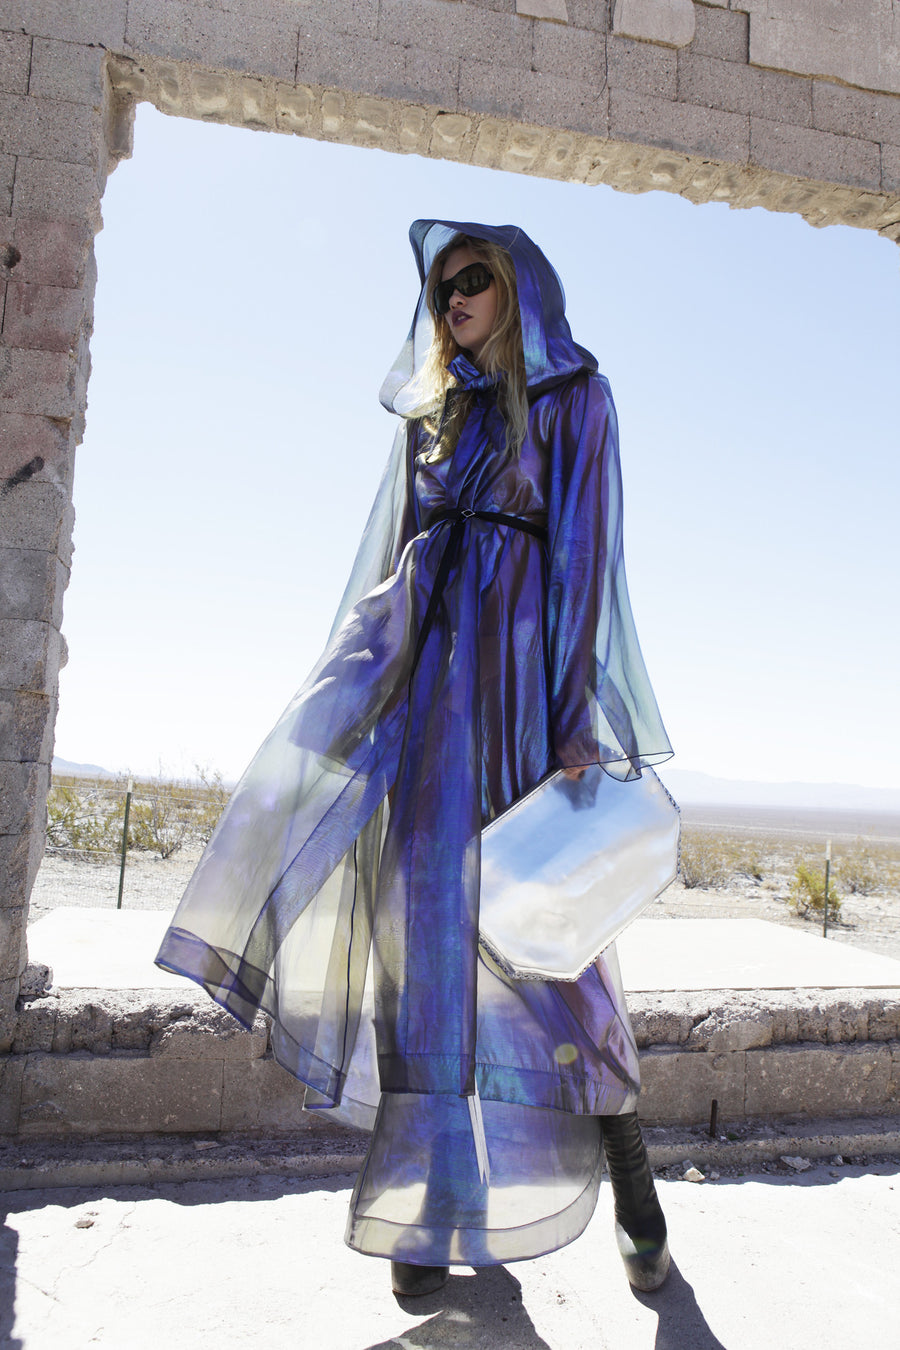 Maggie Laine IMG model Wendy Nichol New York Clothing Designer Handmade in NYC New York City SS17 Fashion Runway Show Signals to the Mothership Made to Order Custom Tailoring Made to Measure Death Valley Hooded Psychedelic Coat Sheer Transparent Silk Holographic Purple Blue Silver Belle Sleeve Hood Cape Jacket Cloak Long Train Witch Wizard Alien UFO Total Drone 